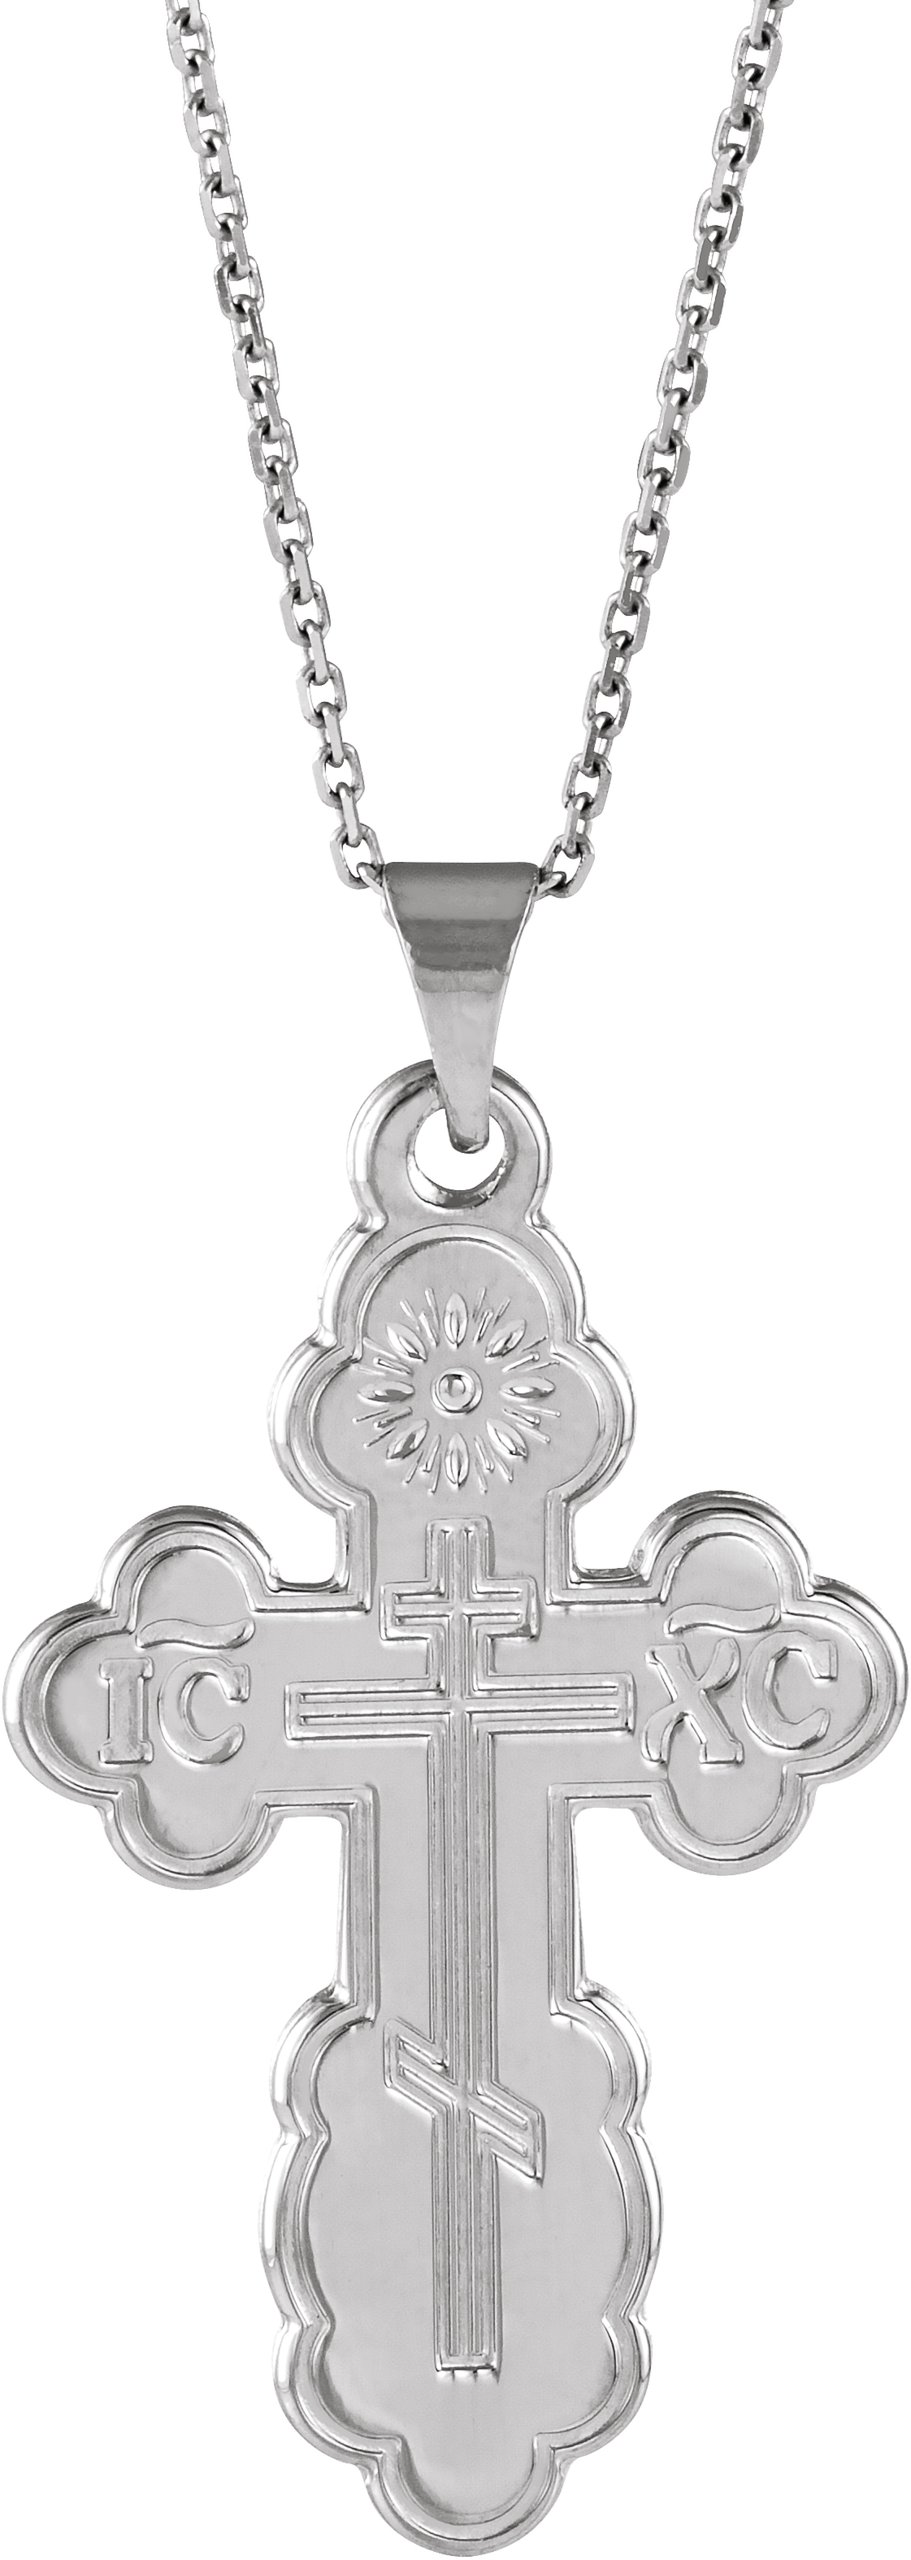 Sterling Silver 40x26 mm Orthodox Cross 24" Necklace